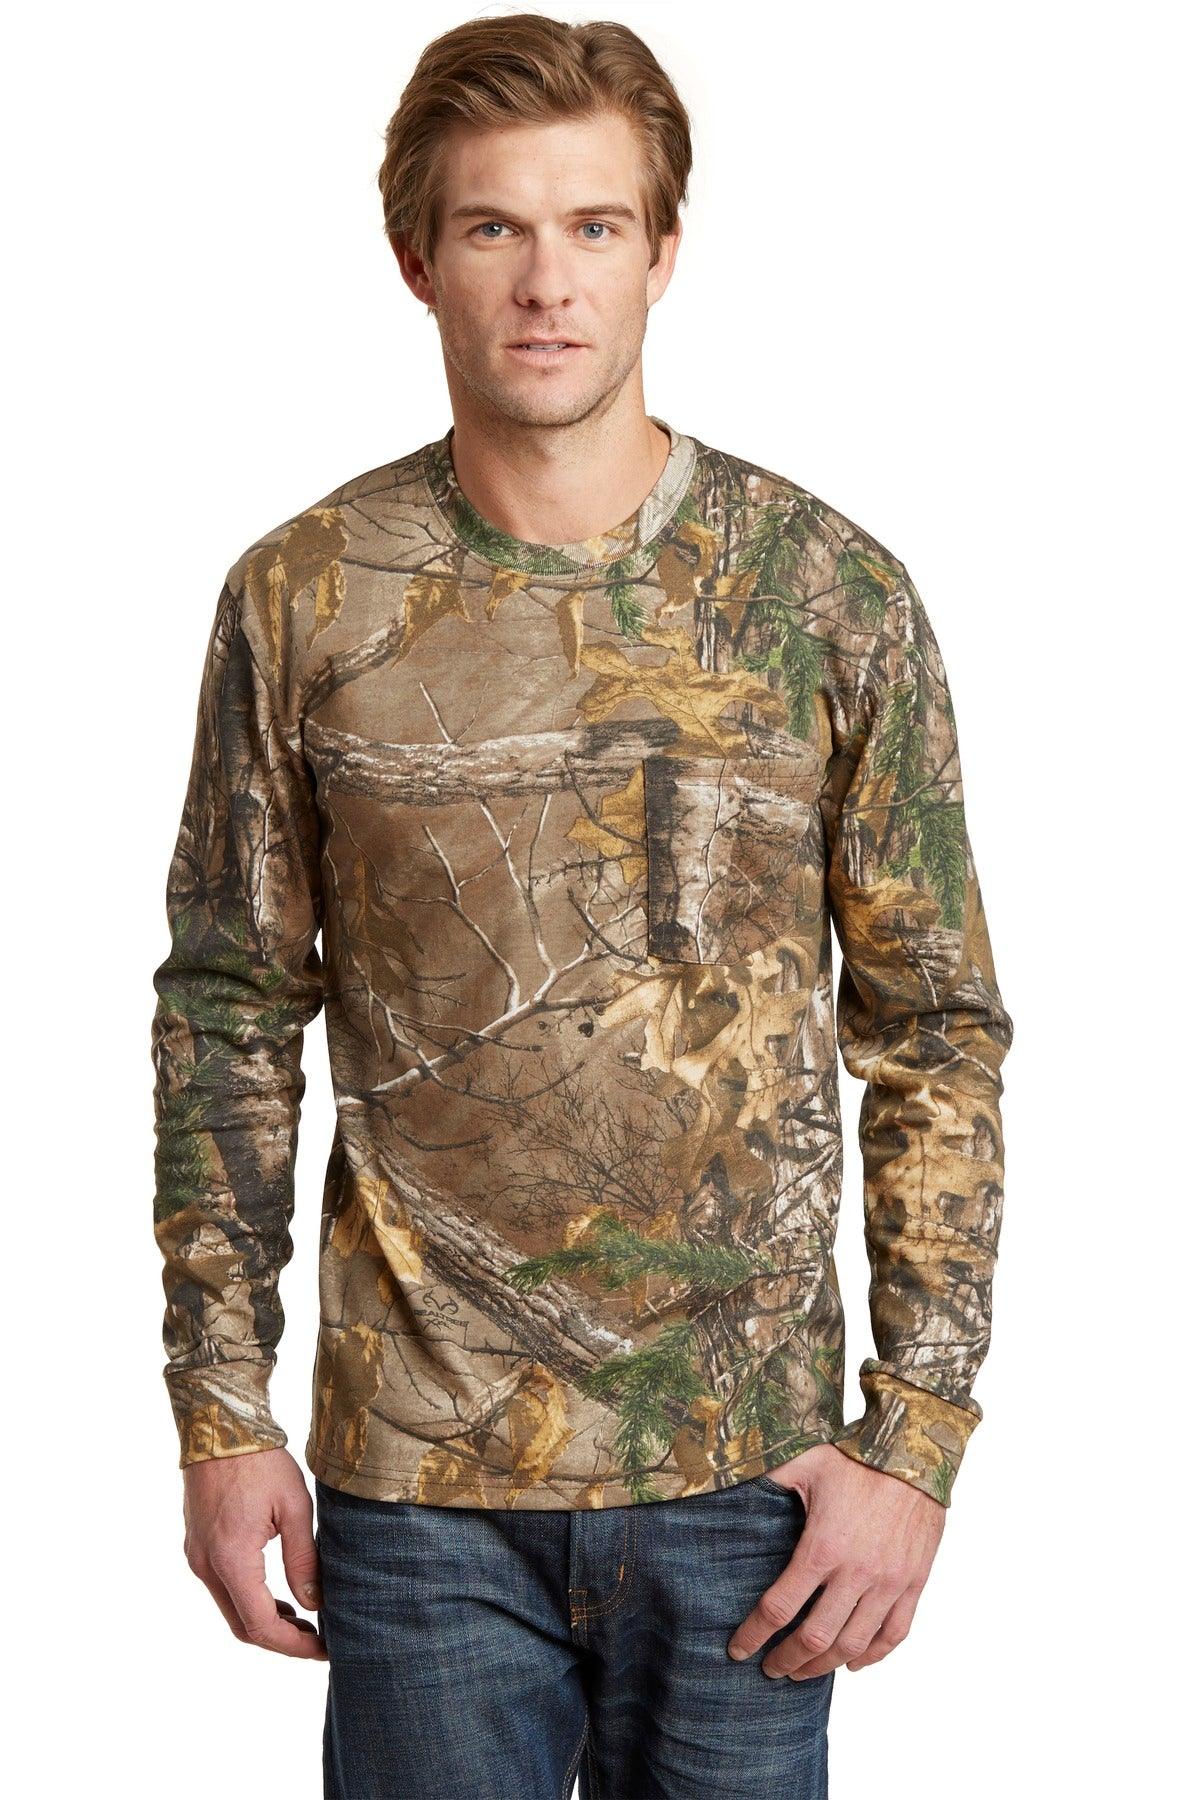 Russell Outdoors Realtree Long Sleeve Explorer 100% Cotton T-Shirt with Pocket. S020R - Dresses Max